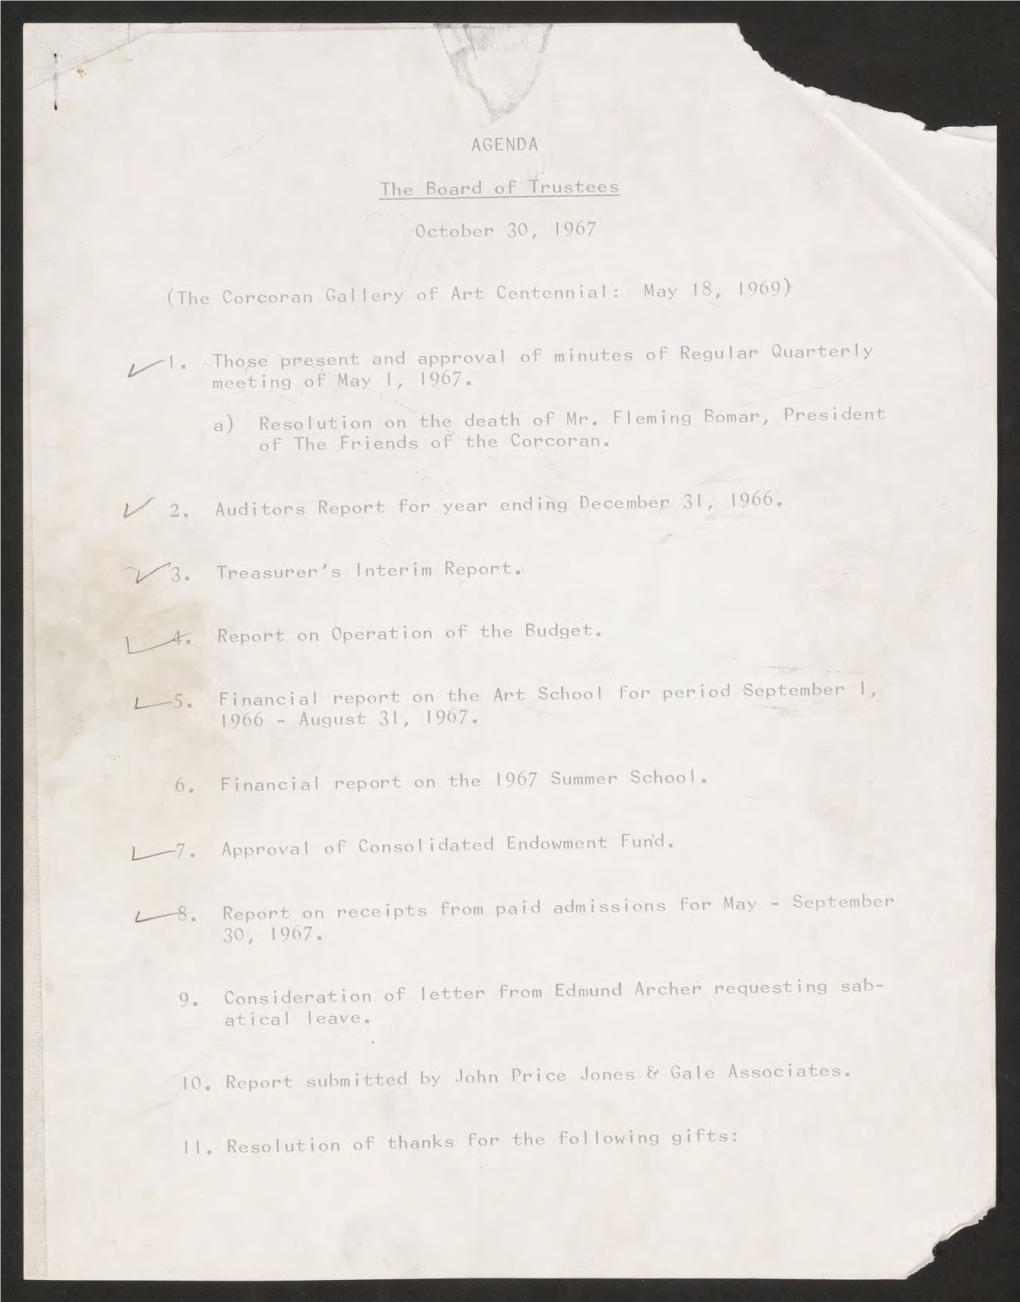 I. Those Present and Approval of Minutes of Regular Quarterly Meeting of May I, 1967